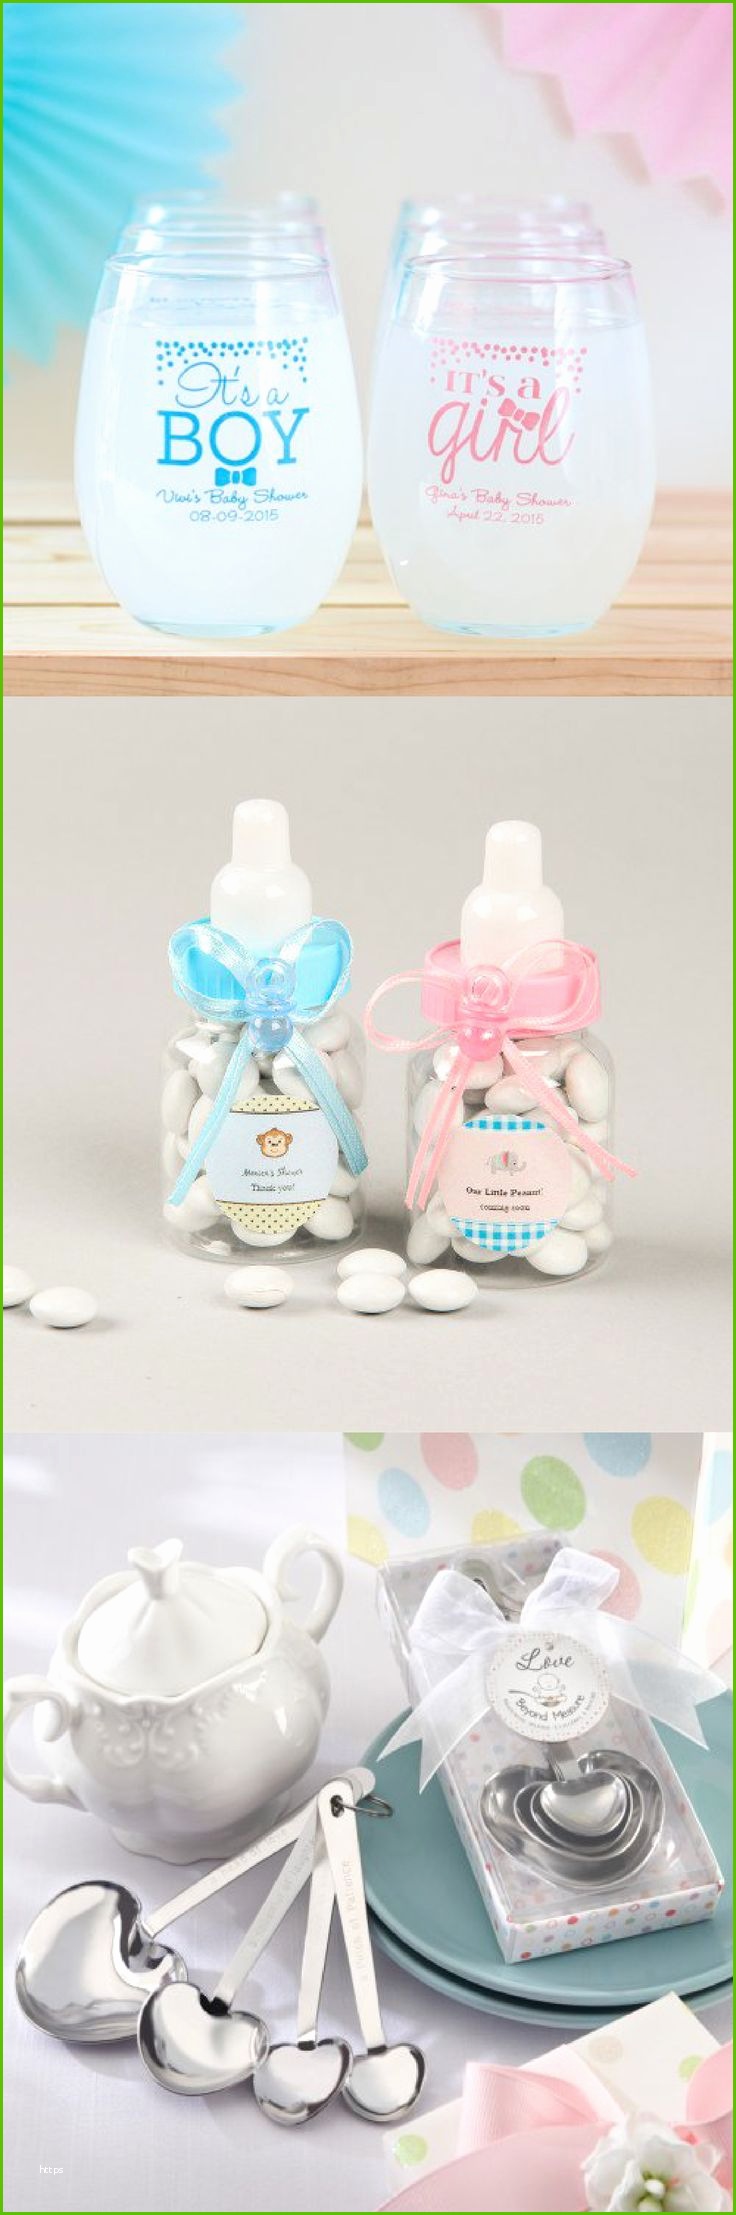 Full Size of Baby Shower:enamour Baby Shower Gifts For Guests Picture Ideas Baby Shower Gifts For Guests Baby Shower Gifts For Guests Inspirational Thank Your Guests With The Perfect Baby Shower Favors